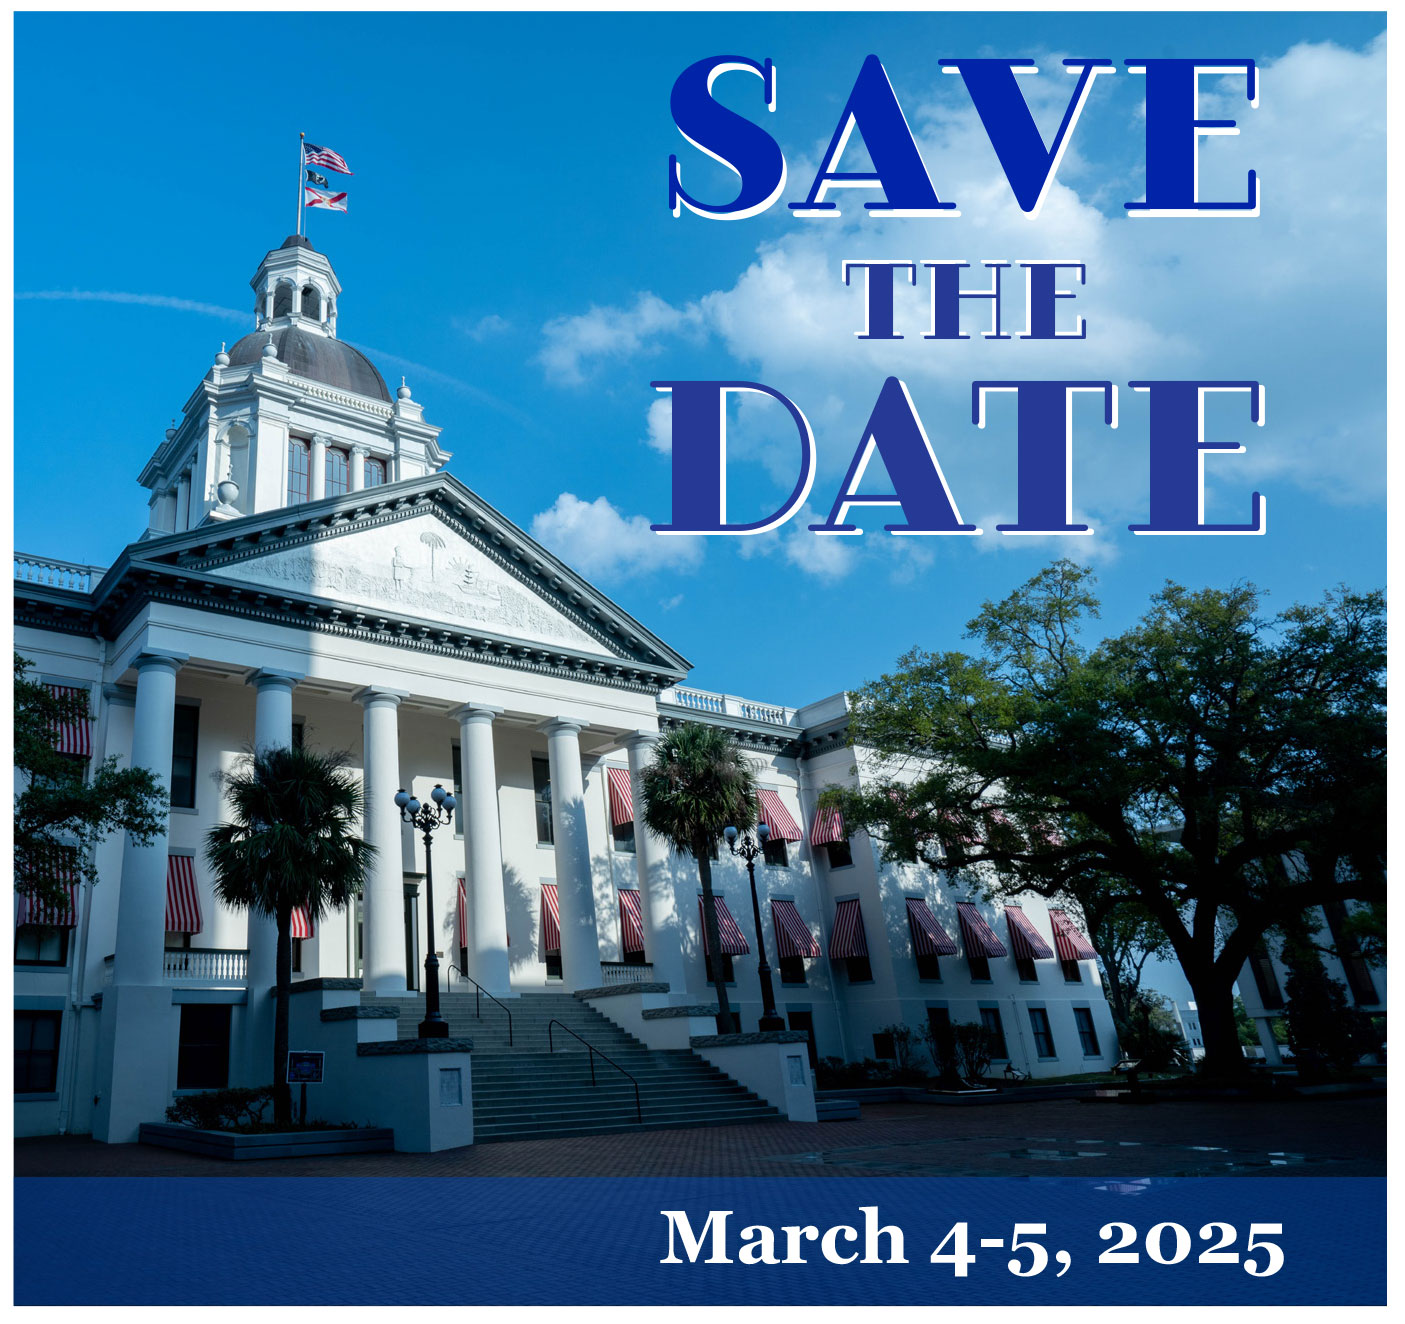 PBC Day 2025 Save the Date - March 4-5, 2025